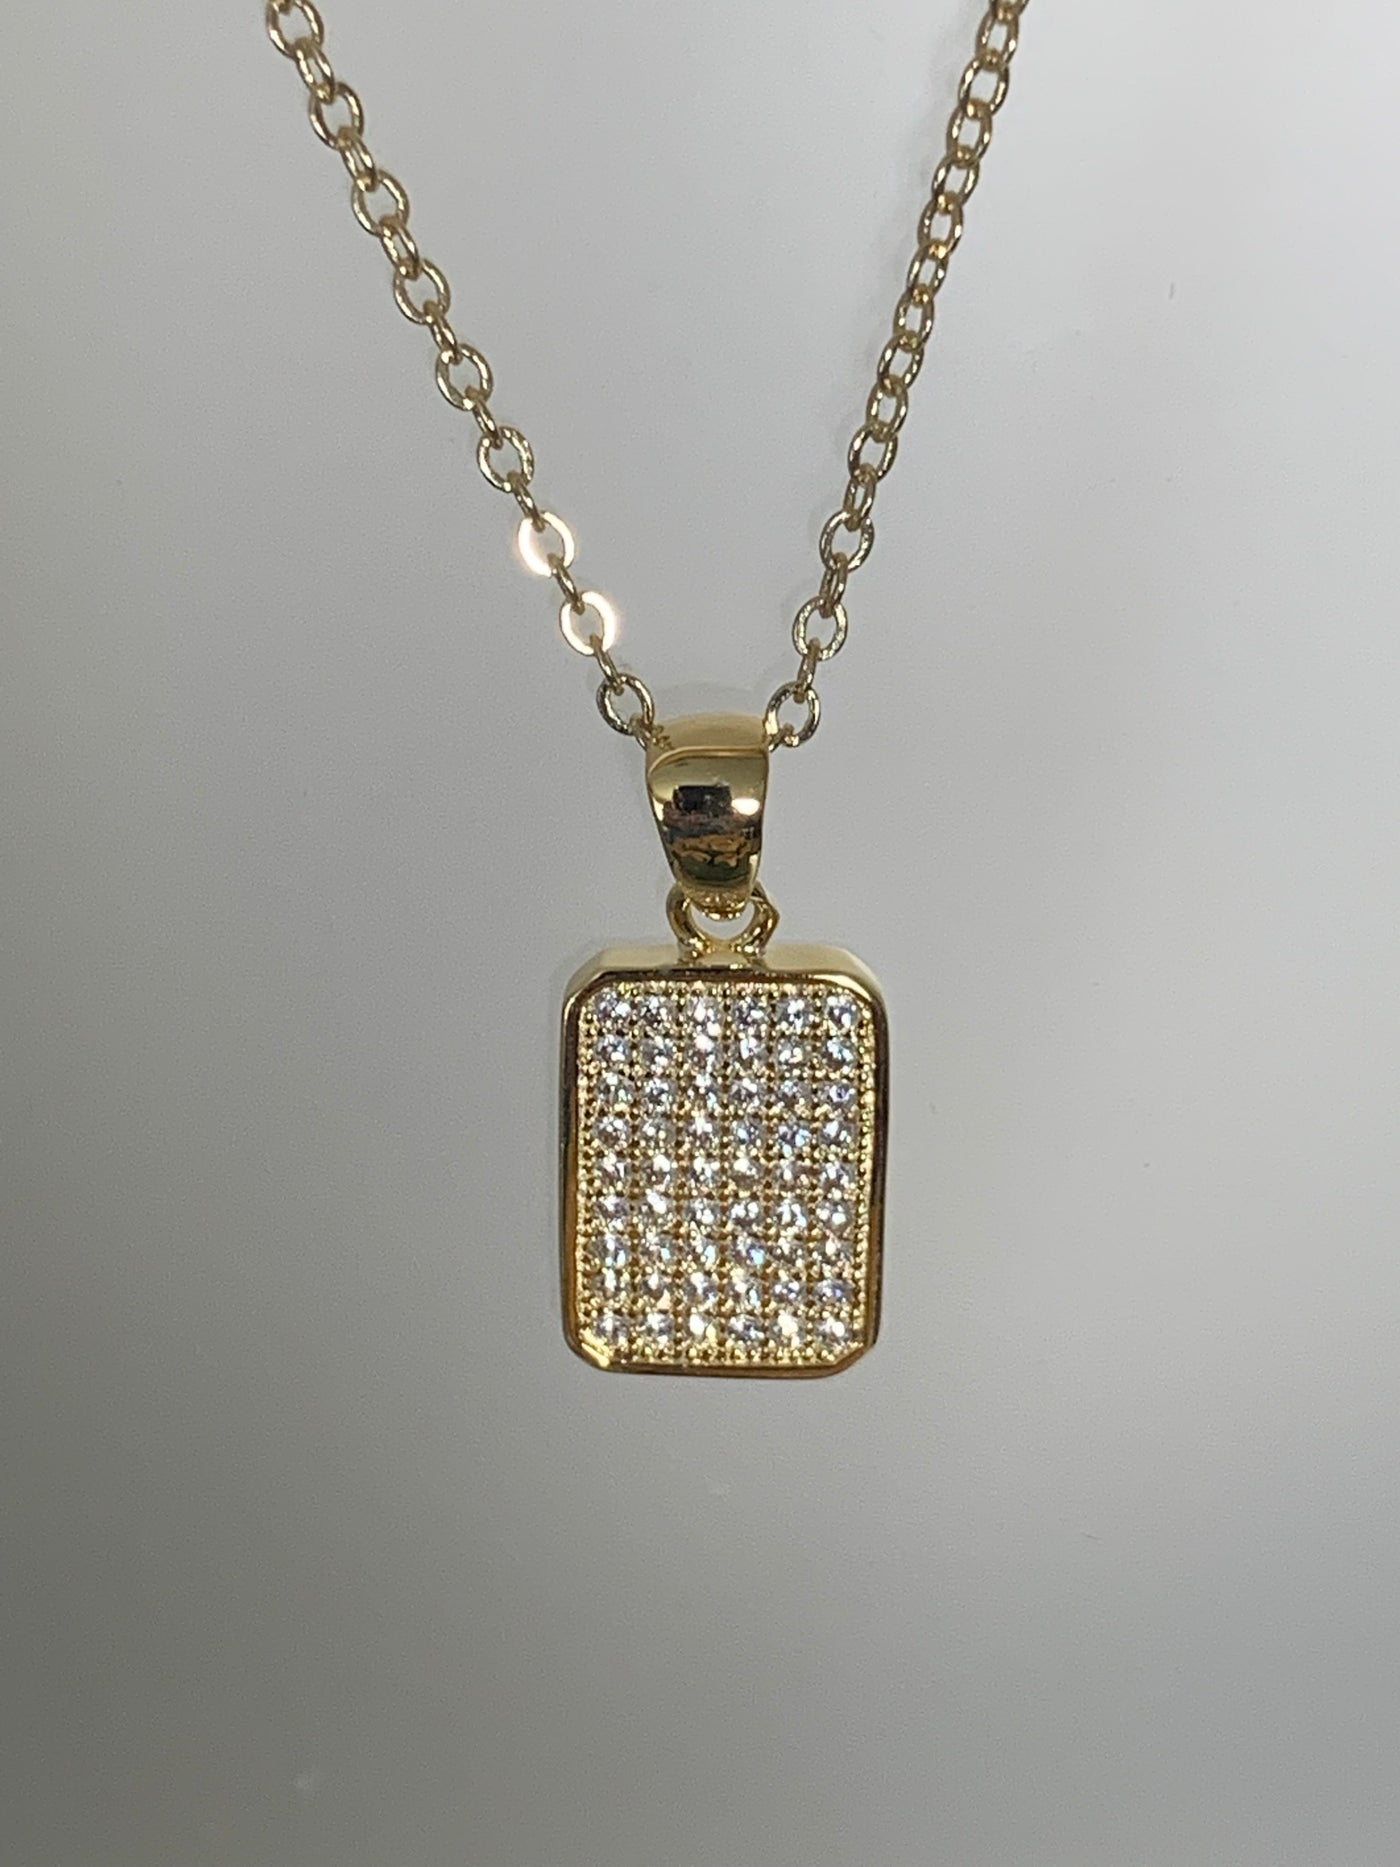 Pave Set Cubic Zirconia Rectangular Shape Pendant in Silver, Yellow & Rose Gold Tone